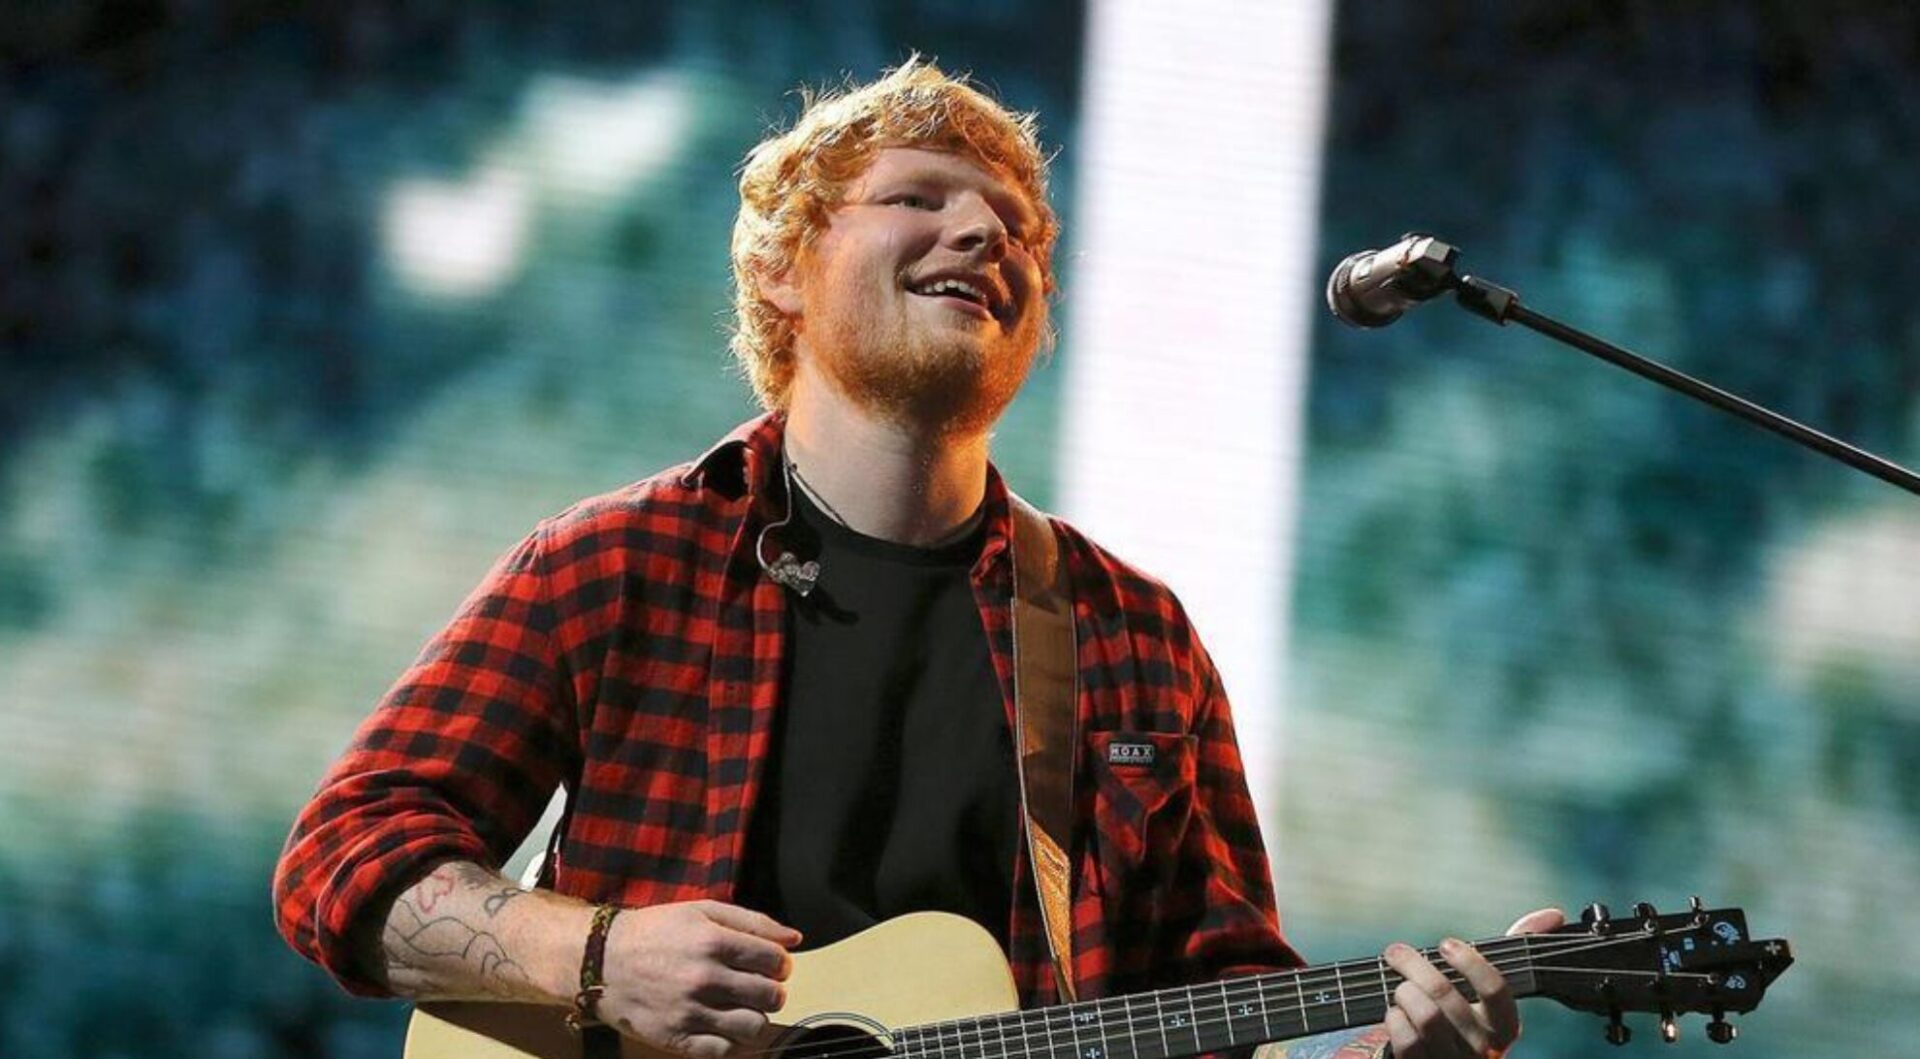 Ed Sheeran Teases Upcoming "Autumn" Album with New Music